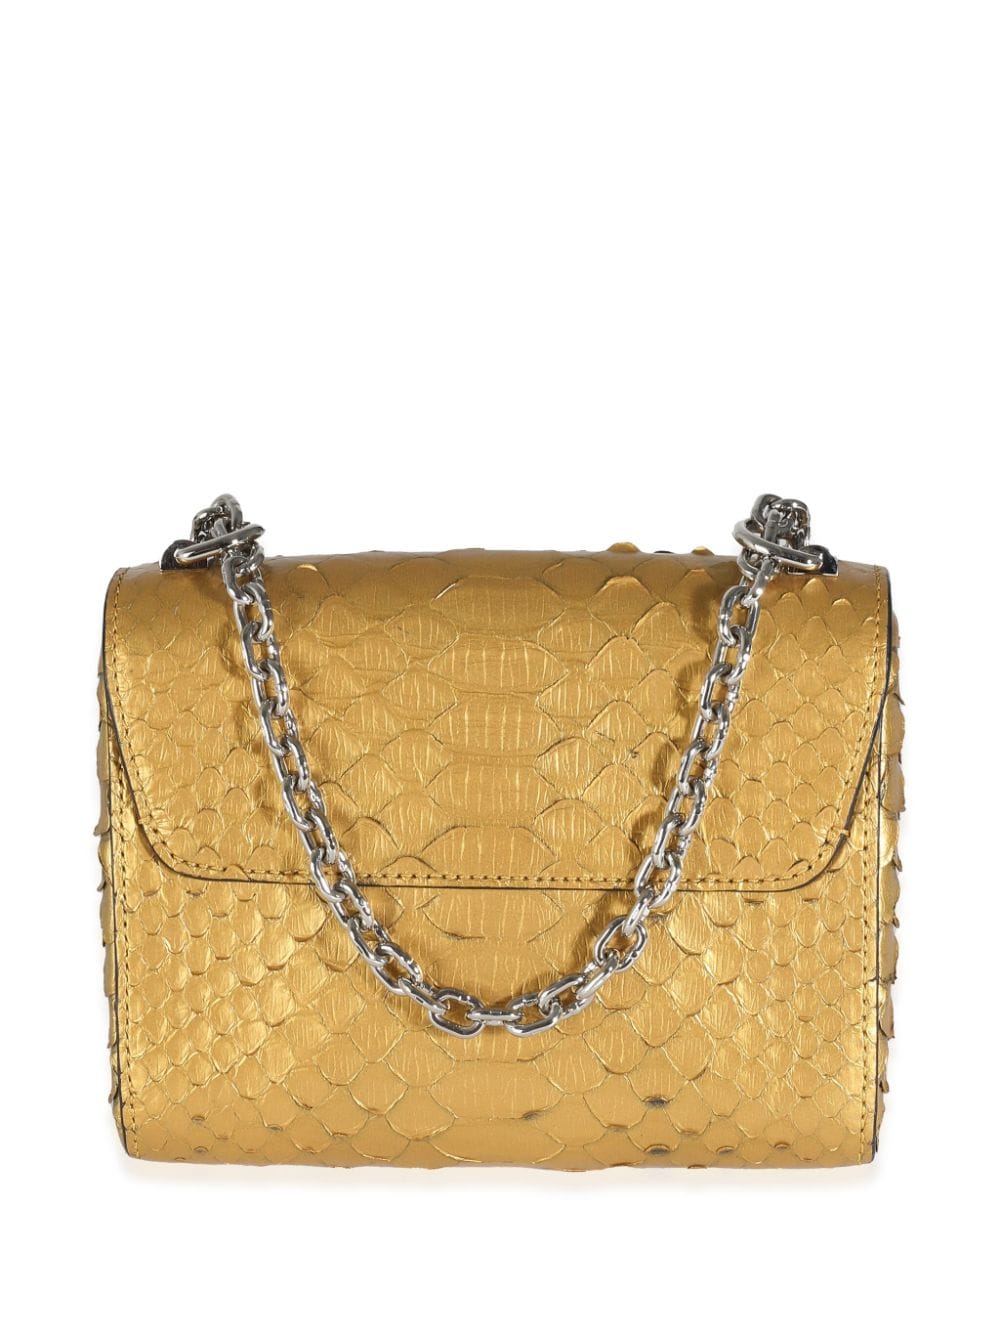 Pre-owned Louis Vuitton 2017 Twist Pm Shoulder Bag In Gold